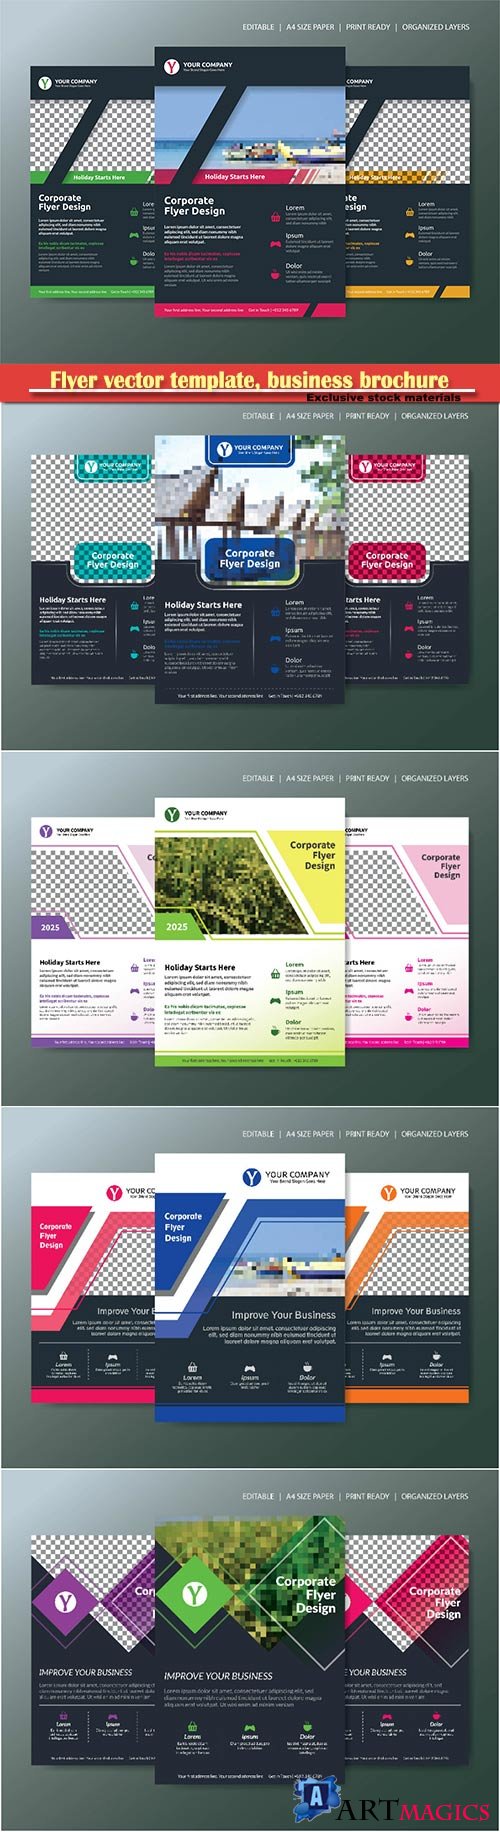 Flyer vector template, business brochure, magazine cover # 29